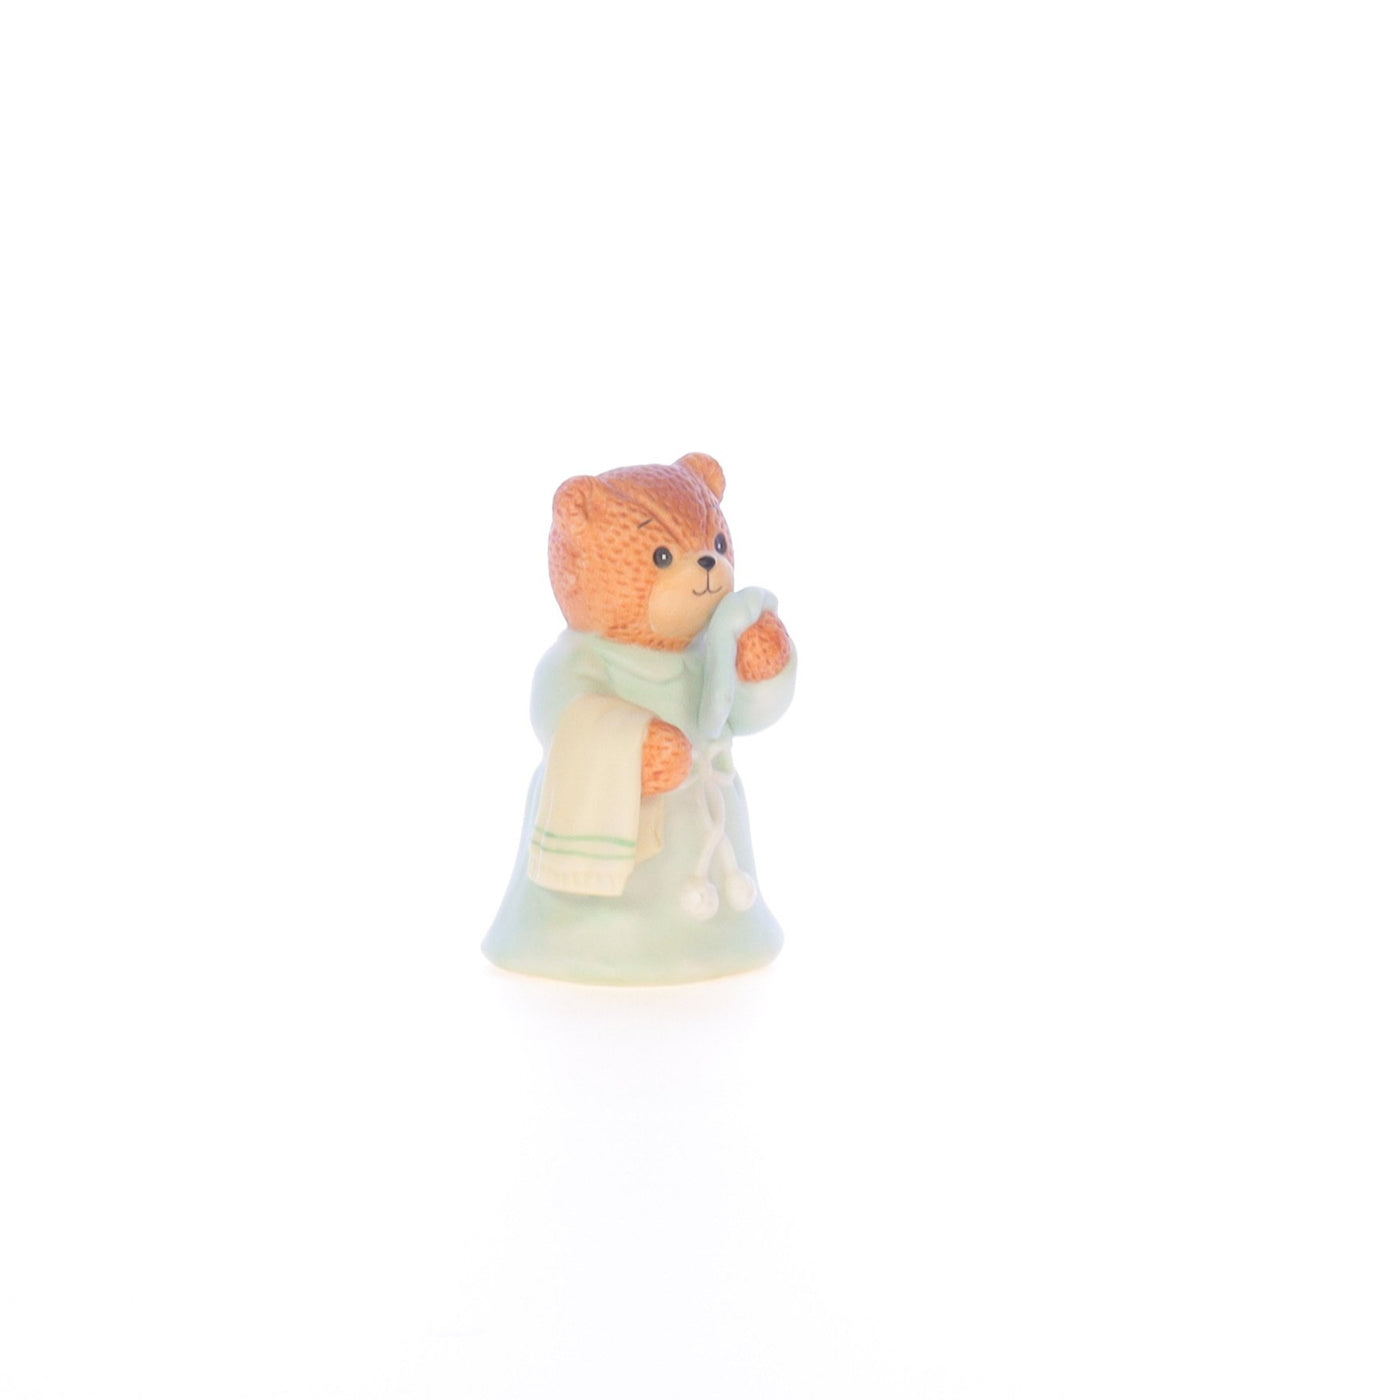 Lucy_And_Me_by_Lucy_Atwell_Porcelain_Figurine_Bear_with_Bath_Robe_Lucy_Unknown_010_08